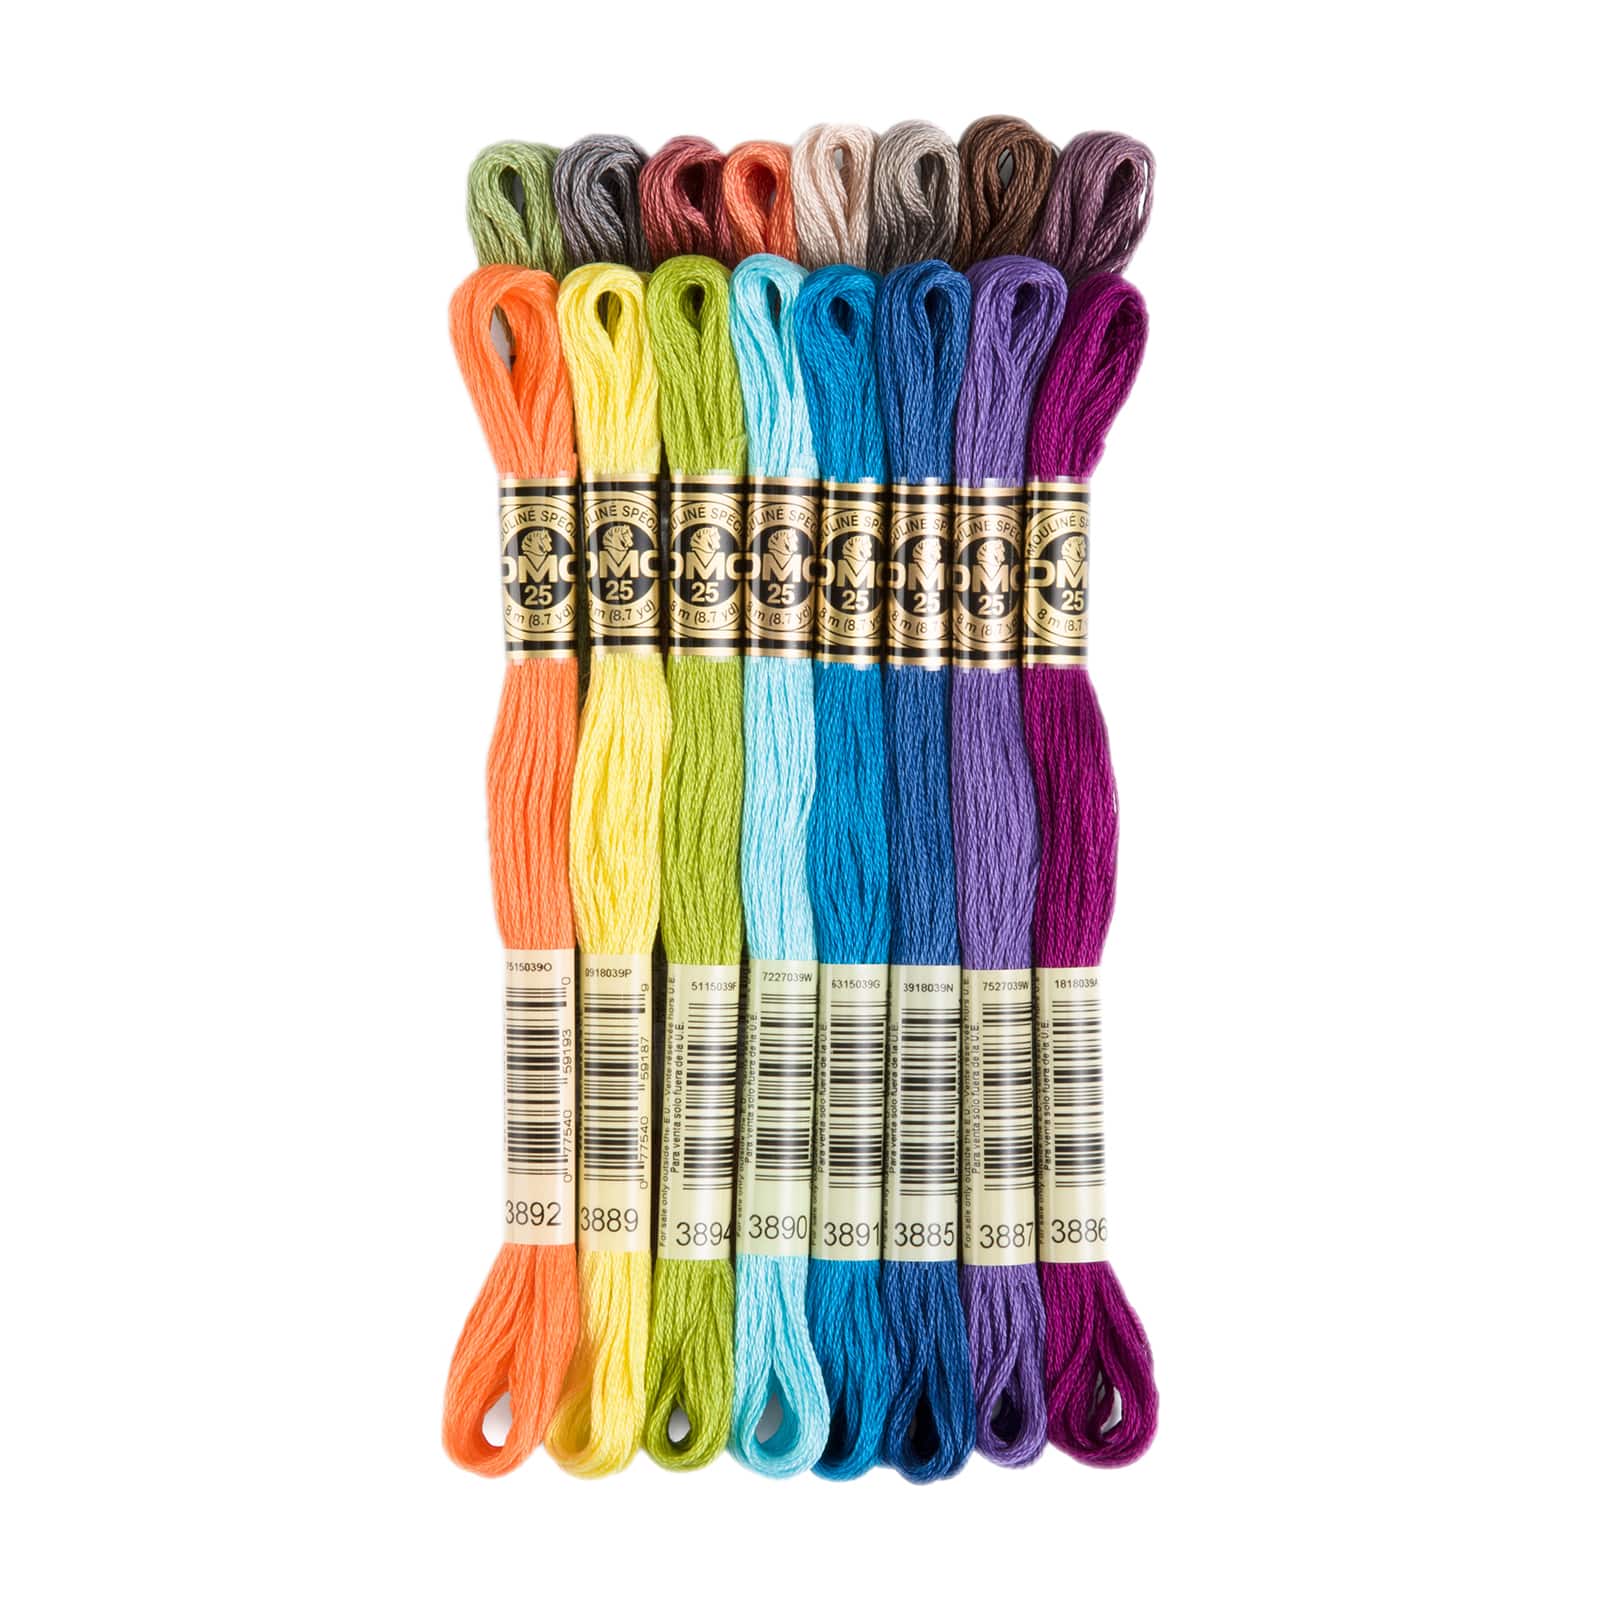 30 Count Floss Bags by Yarn Tree